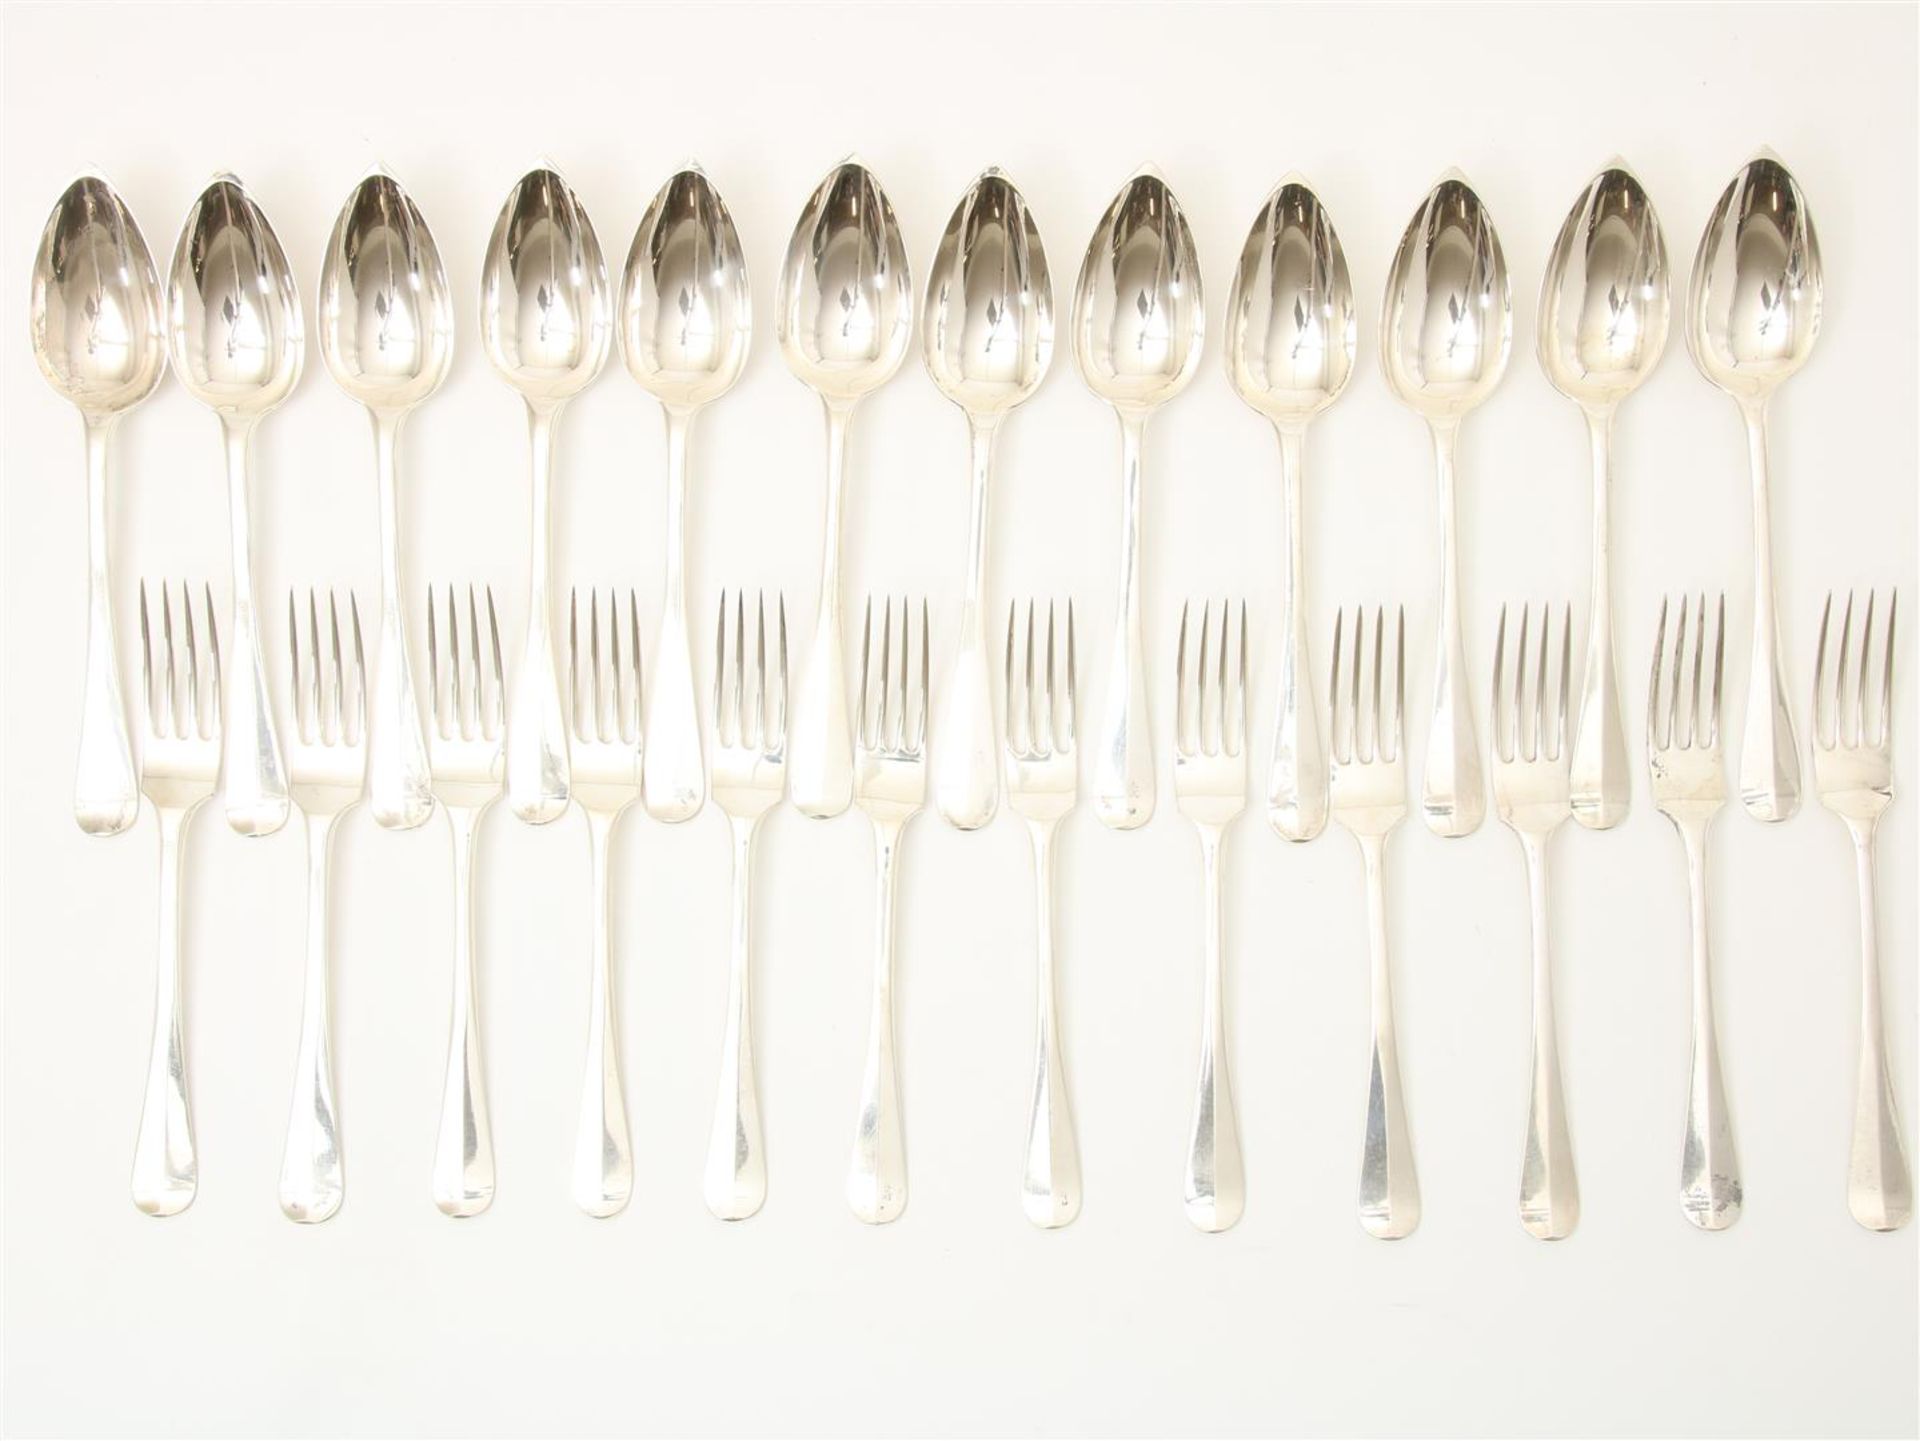 Silver place setting with 12 spoons and 12 forks, Helweg, Amsterdam